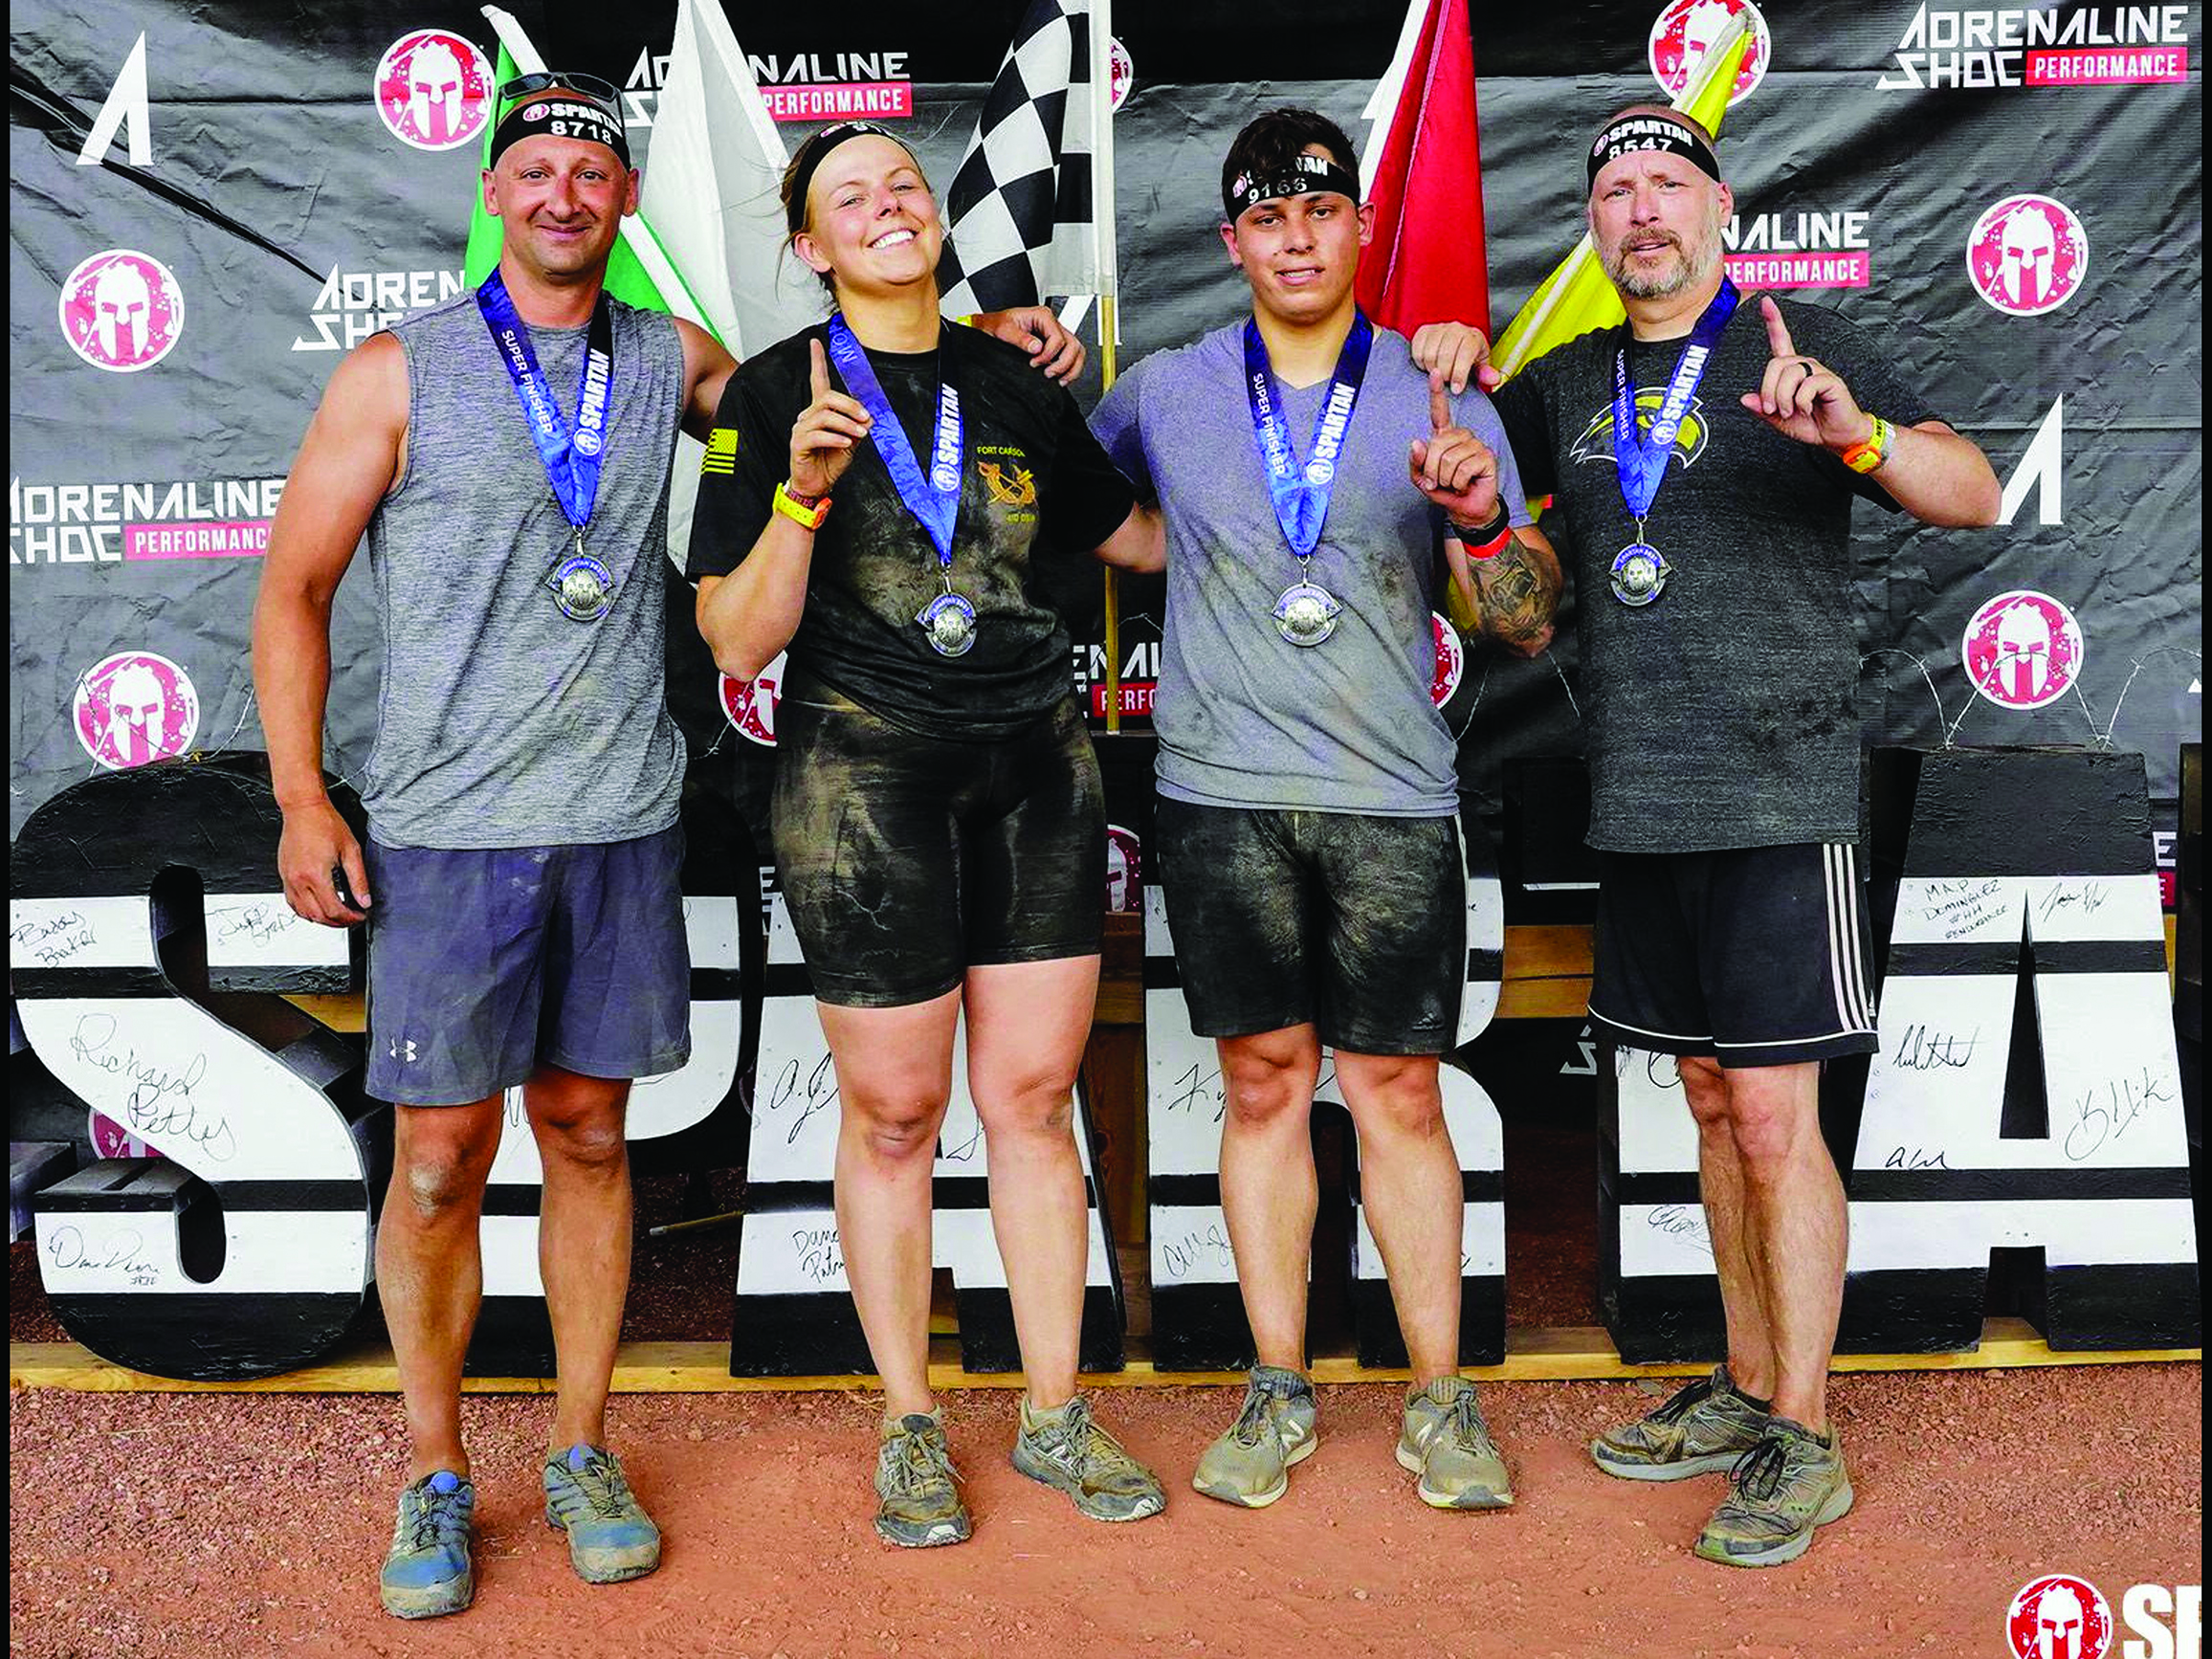 Members of the 1st Stryker Brigade Combat Team, 4th Infantry Division, Fort Carson, CO, completed the Colorado Springs Spartan Super, a 10-km obstacle course race. Pictured L to R: MAJ Jeremy Watford (Brigade Judge Advocate), CPT Ashley Jesser (Deputy Brigade Judge Advocate), SGT Matthew Pierce (2-1 CAV Paralegal), and SFC Kevin Creel (Brigade NCOIC).